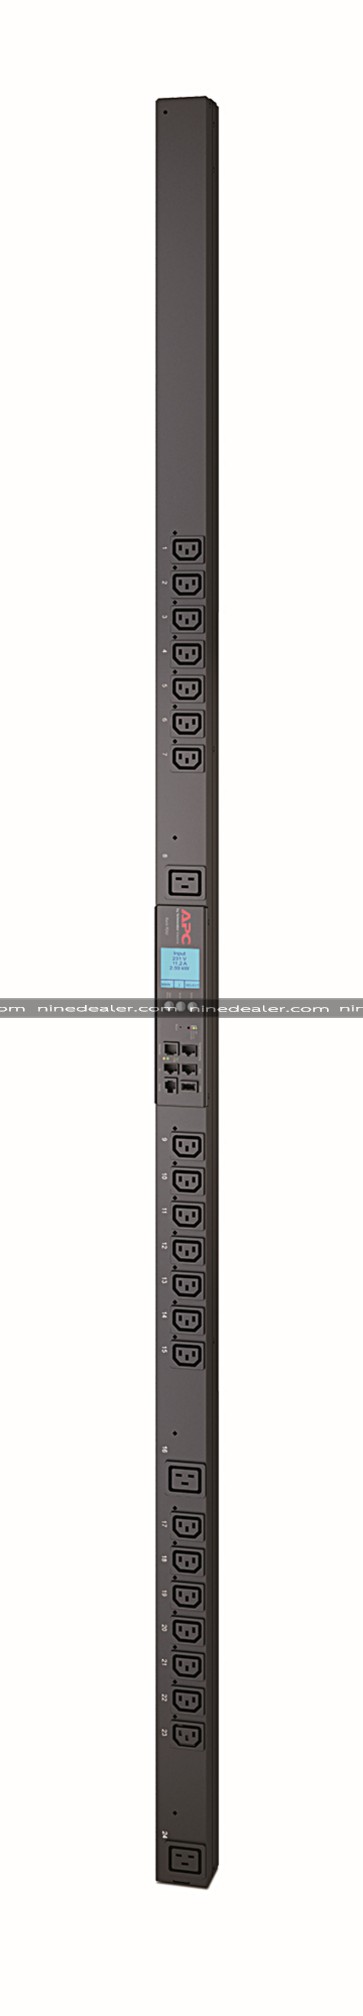 Rack PDU 2G, Metered by Outlet with Switching, ZeroU, 16A, 100-240V, (21) C13 & (3) C19